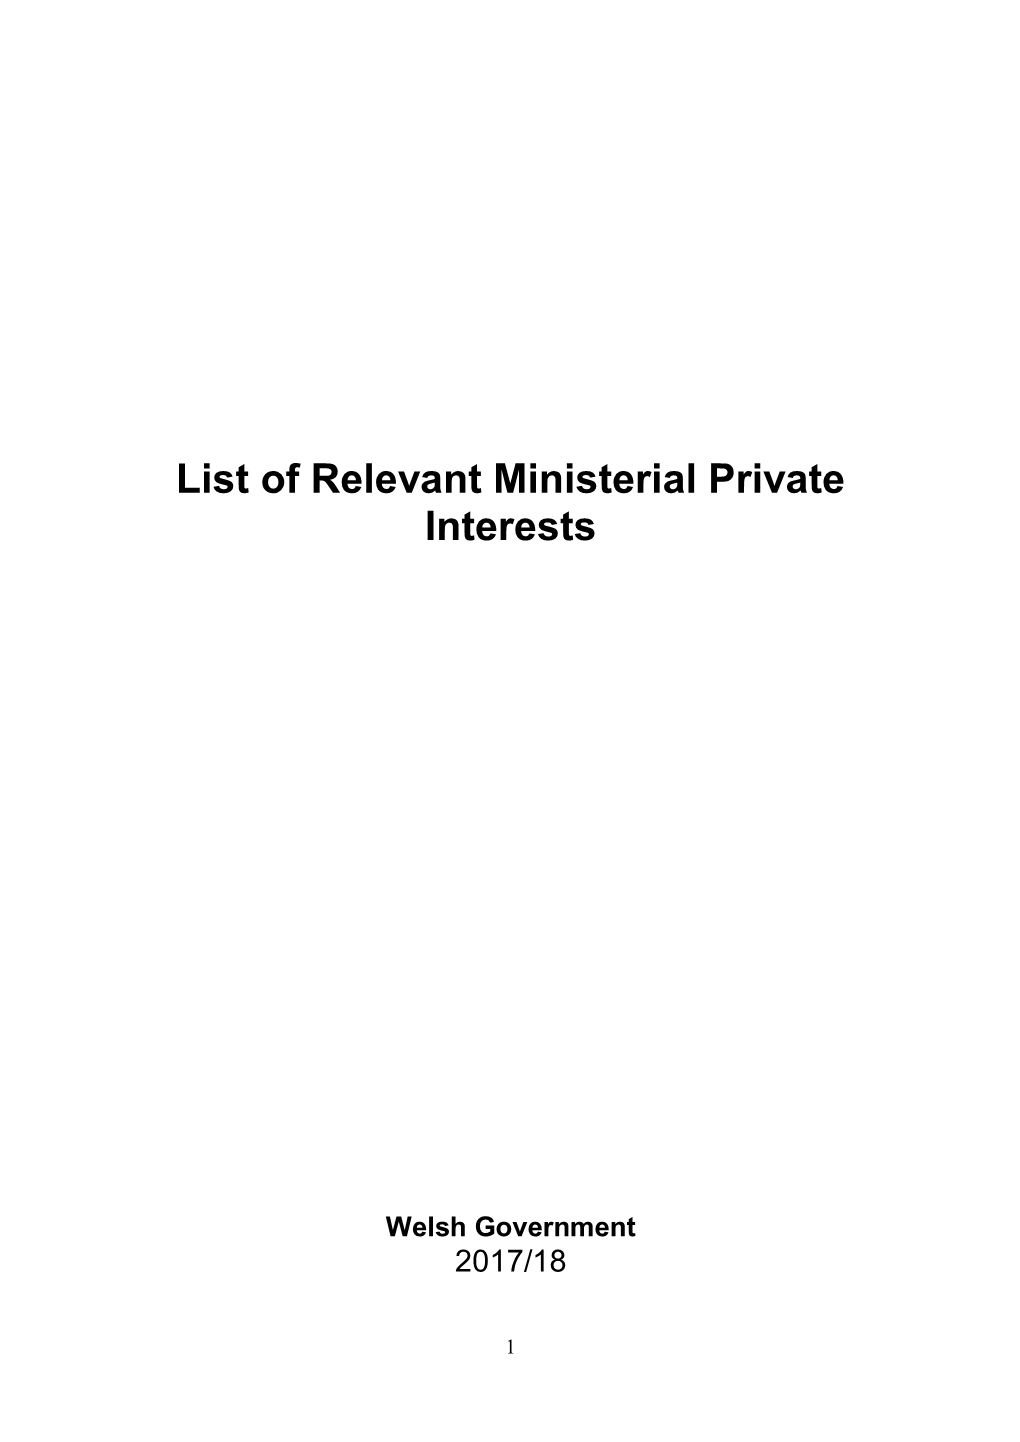 List of Relevant Ministerial Private Interests